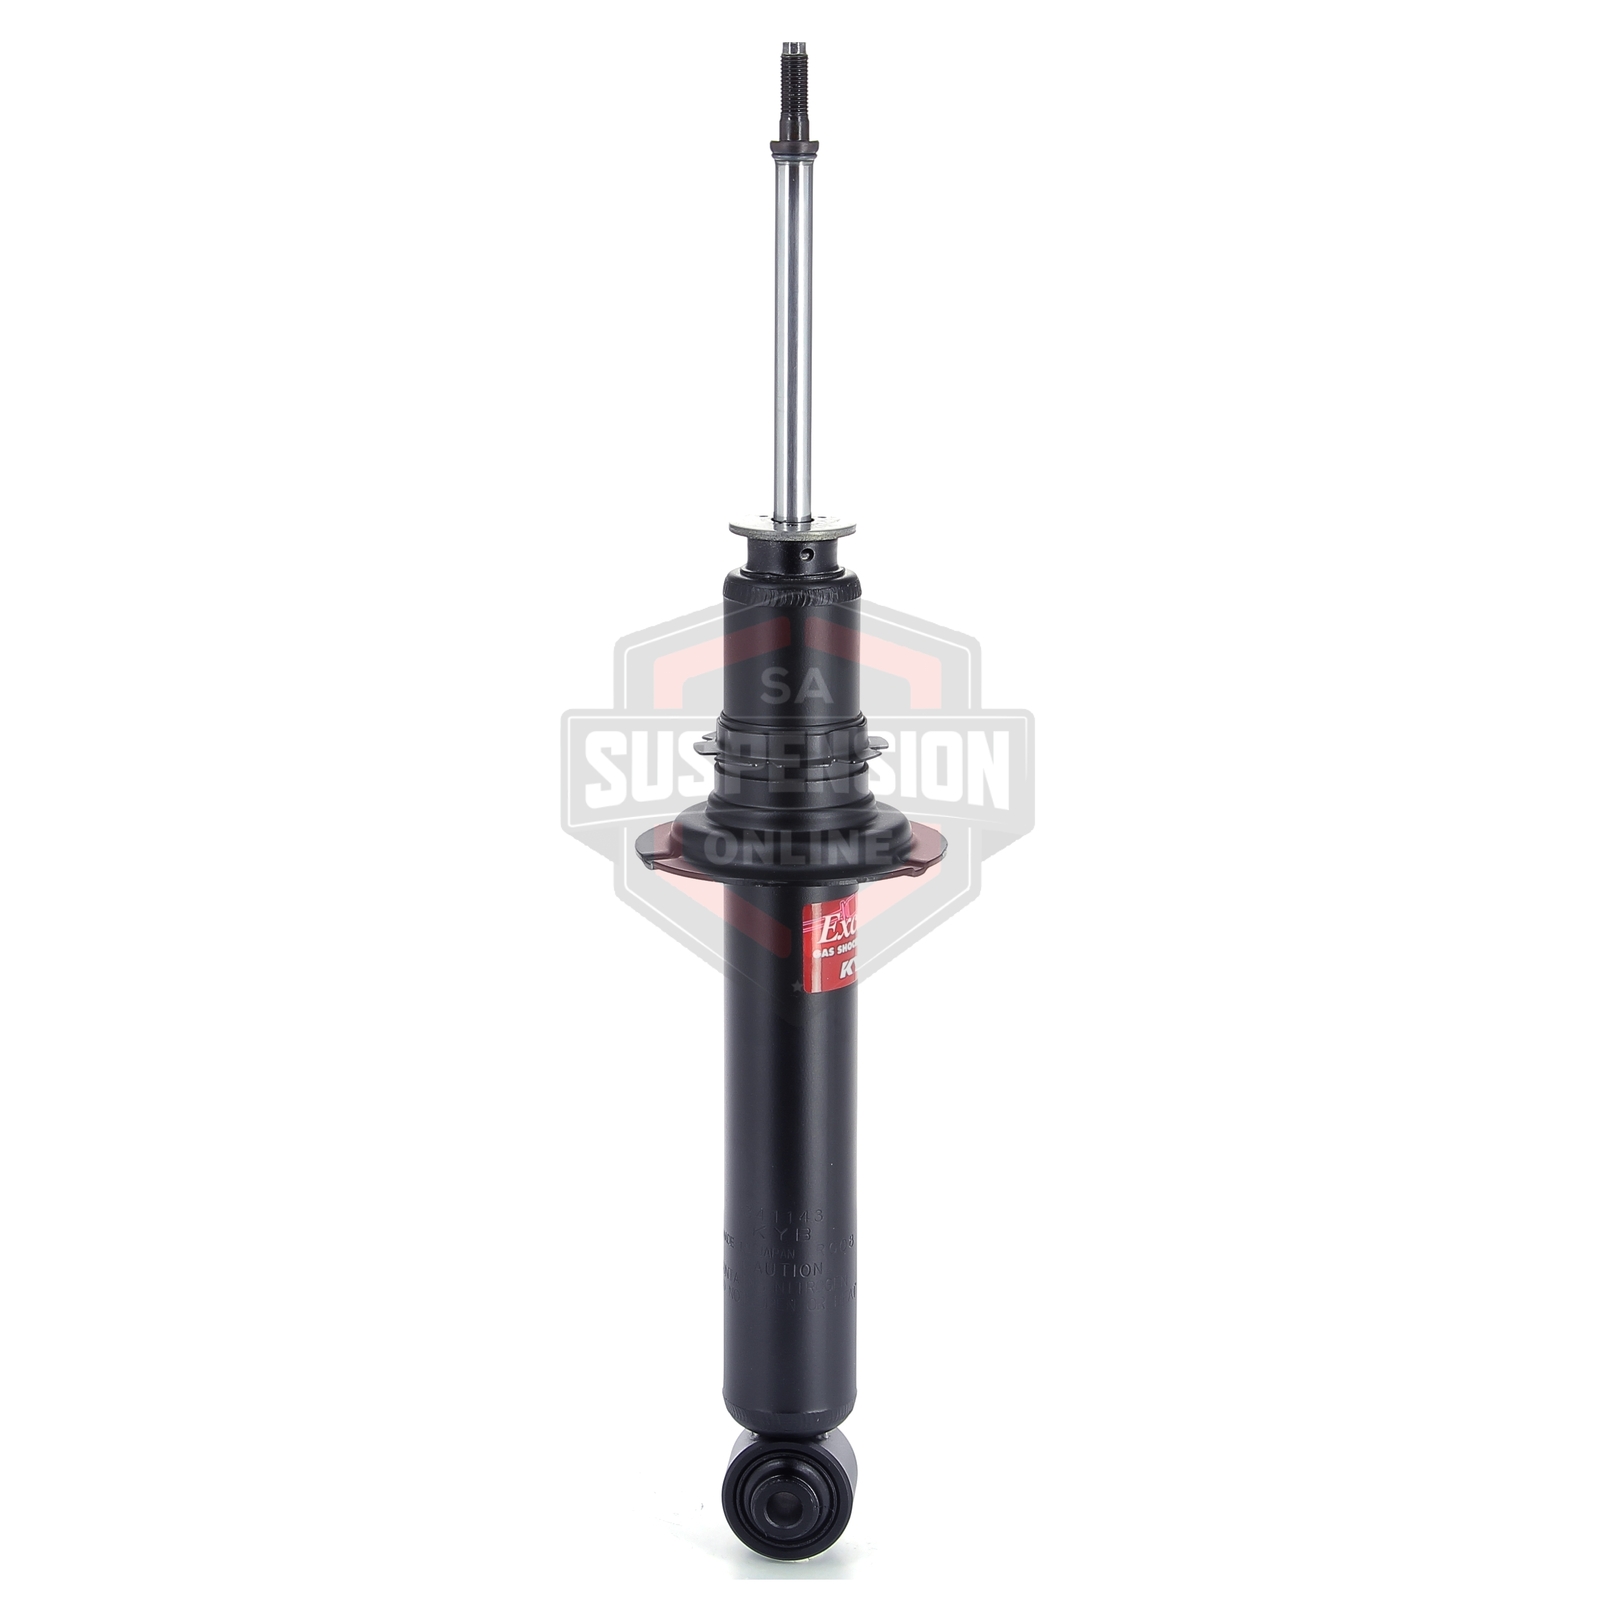 KYB Excel-G Shock Absorber - Standard OE ReplFits Acement (Shock